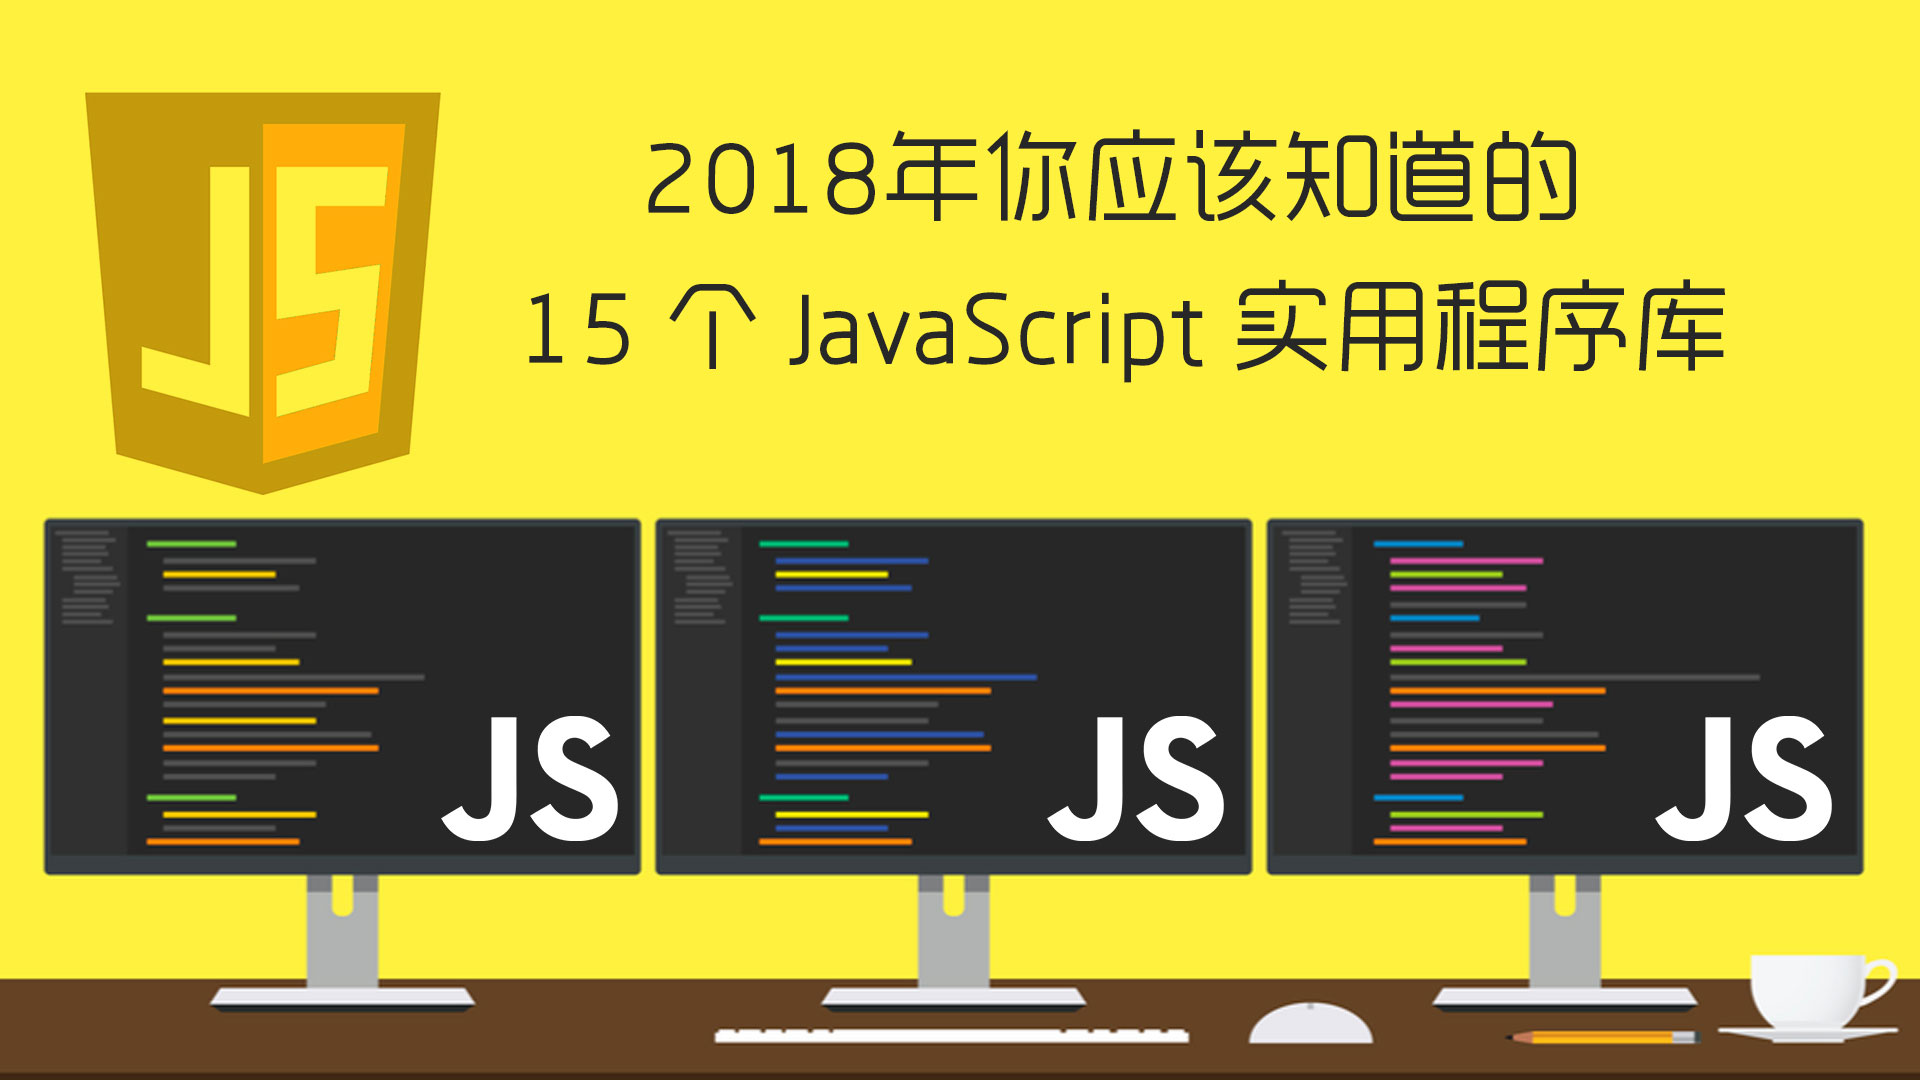 15-javascript-utility-libraries-you-should-know-in-2018-2.jpg